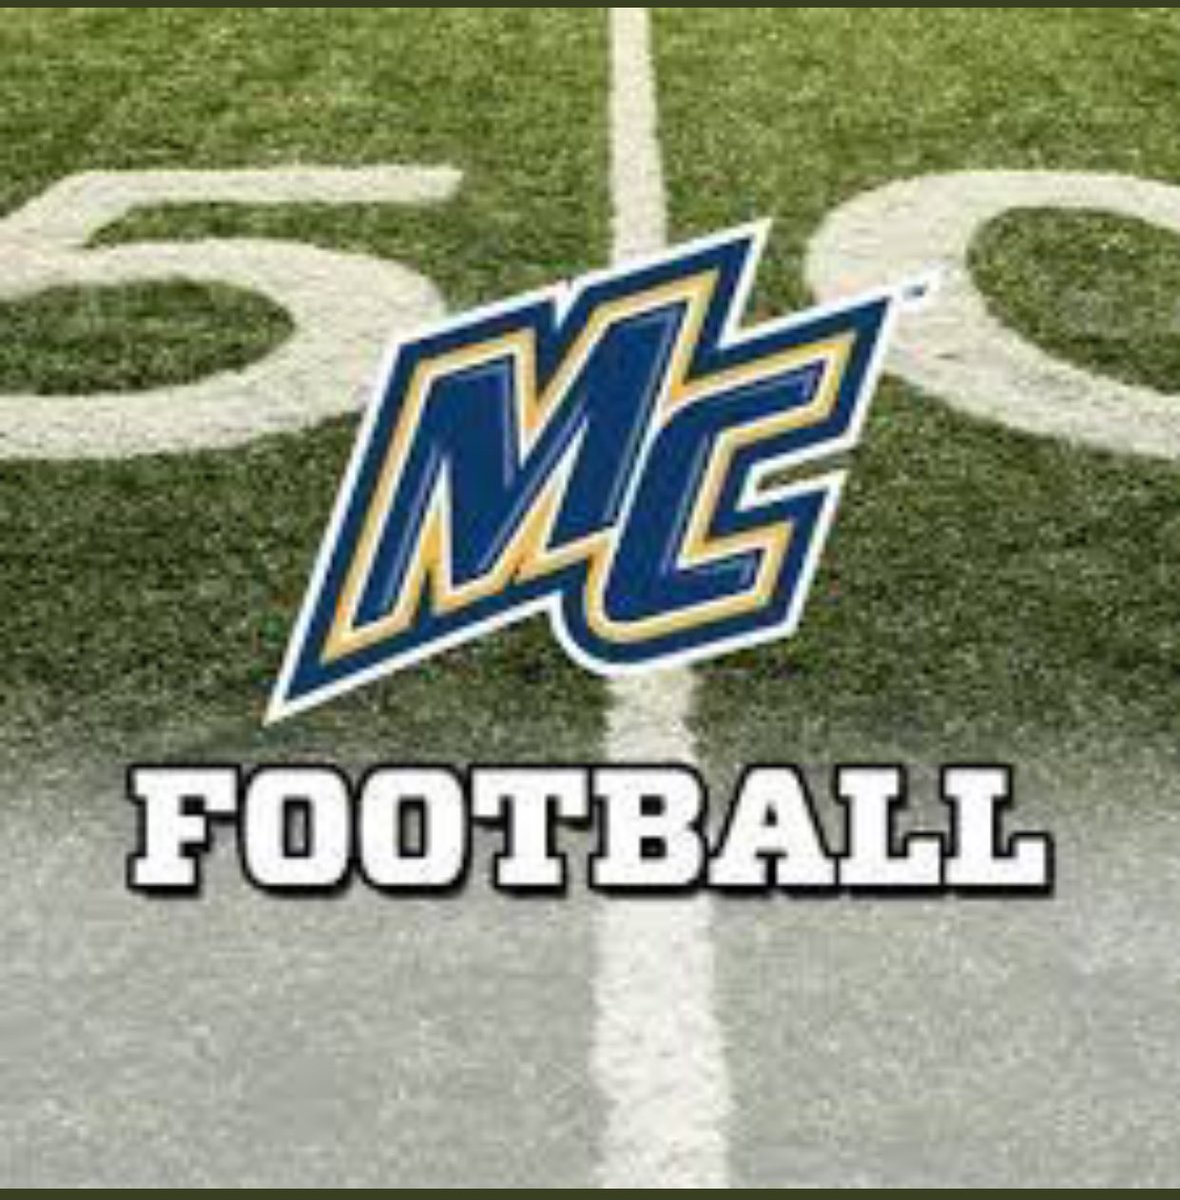 Thankful to have received my first division 1 offer from Merrimack ! #MackTough